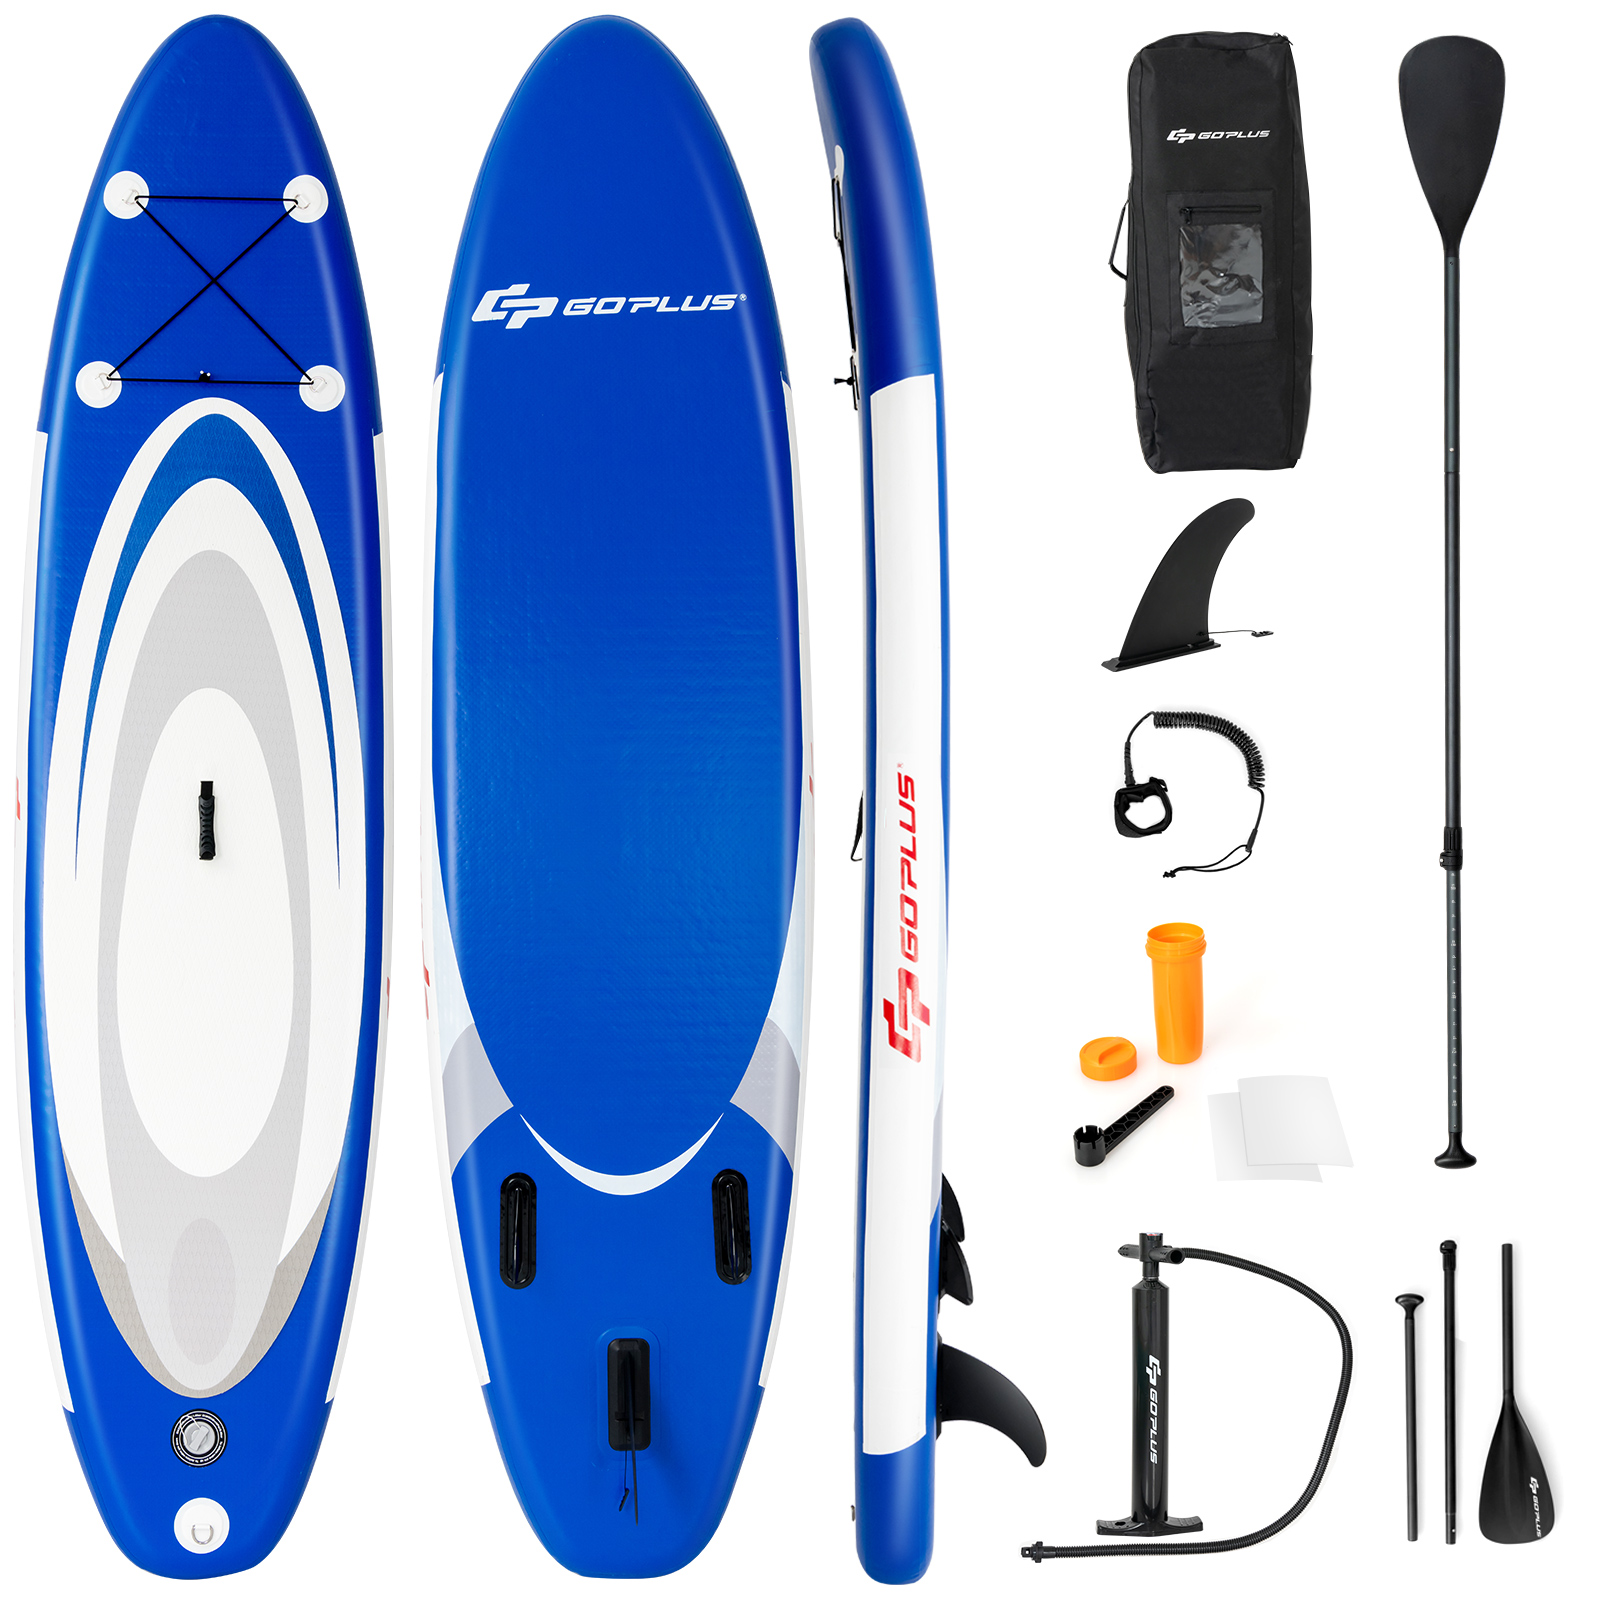 SUP Up Blau COSTWAY Stand Board Paddle,